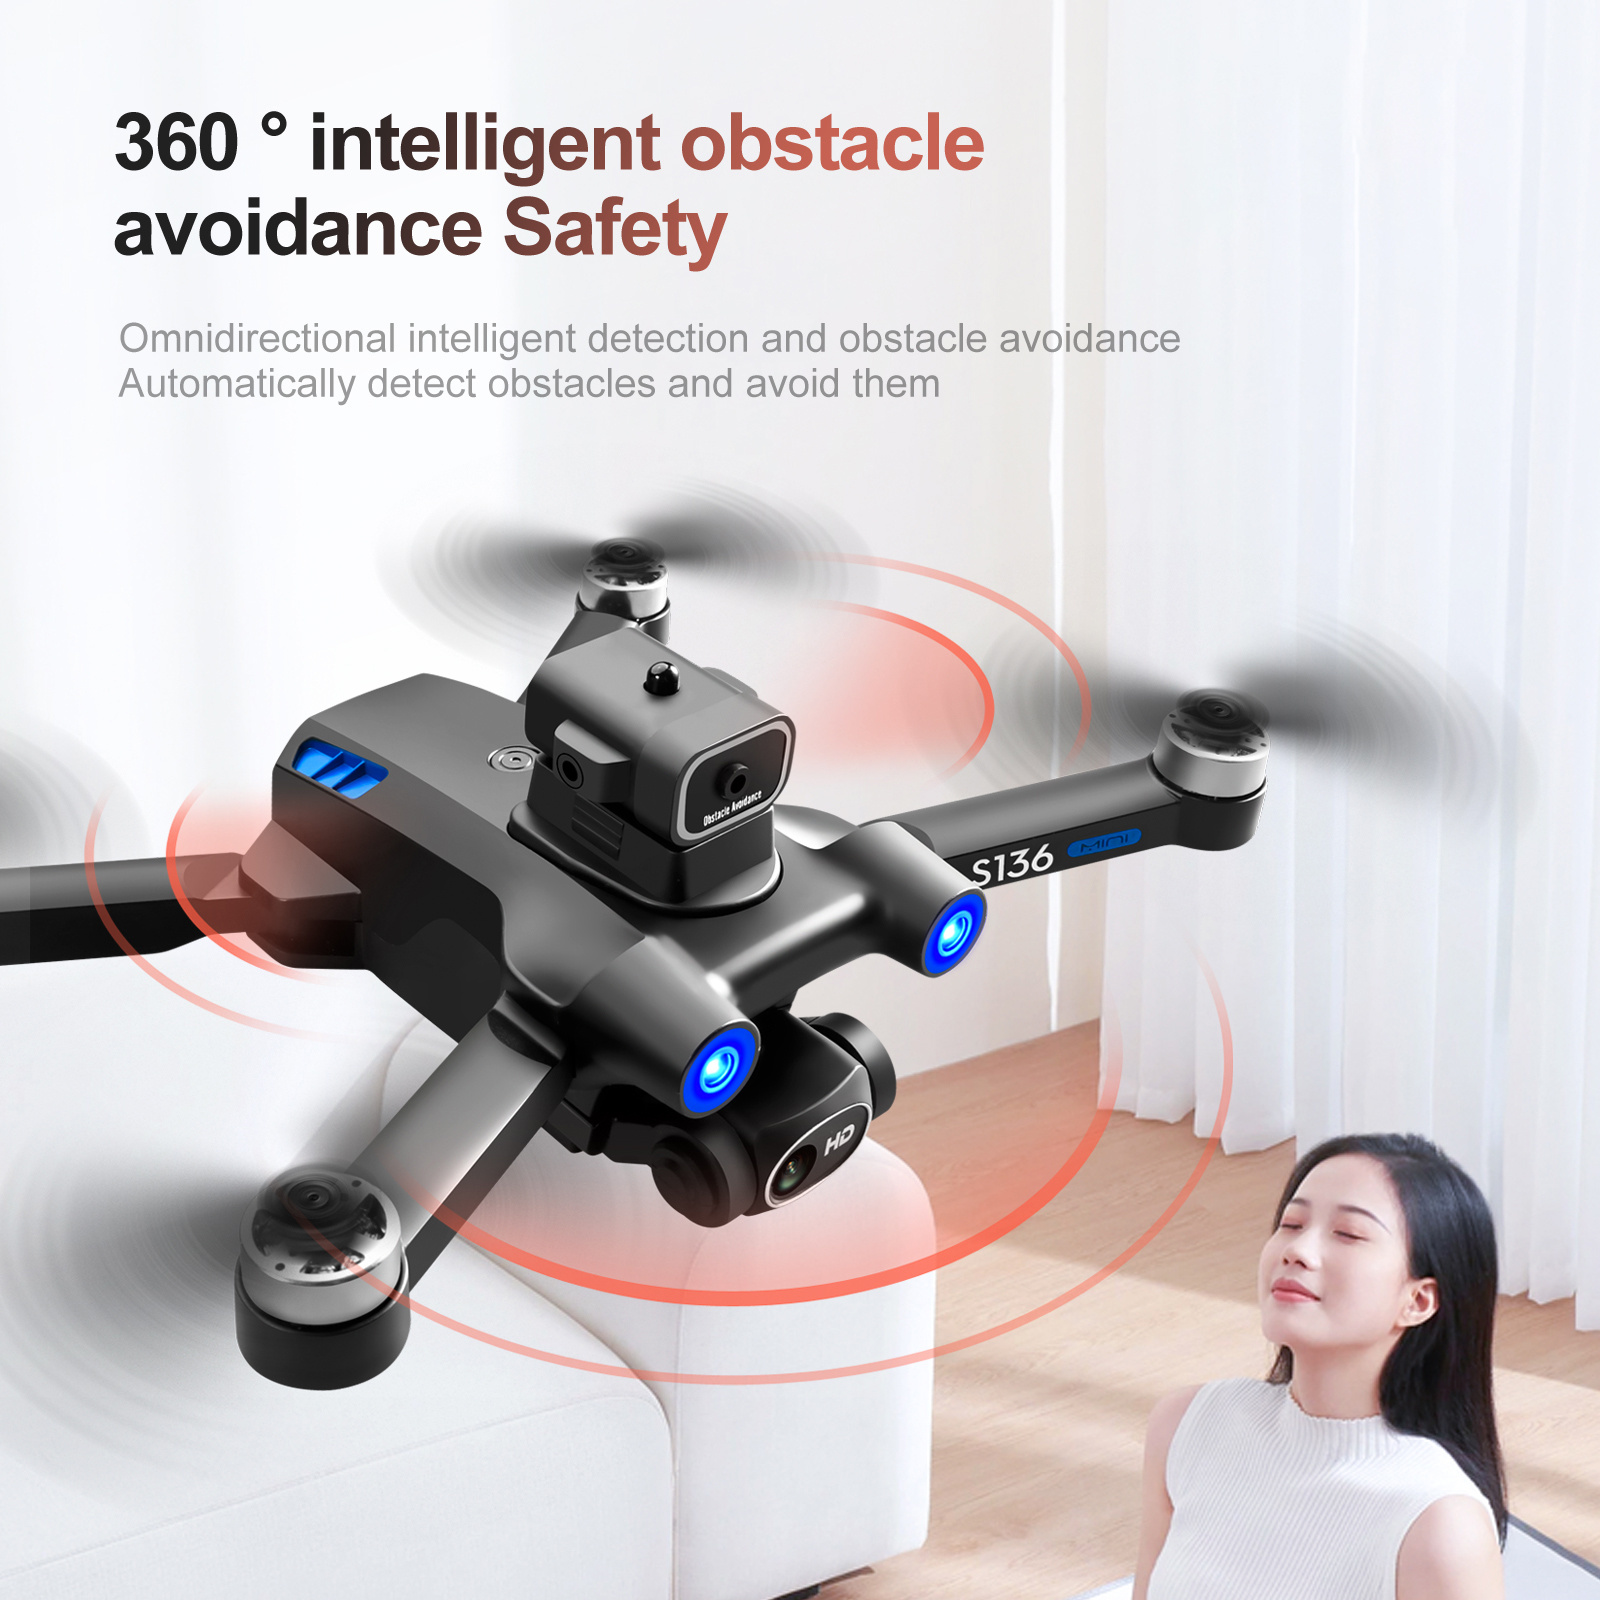 gps positioning drone with brushless motor headless mode intelligent obstacle avoidance optical flow positioning a key return ultra long range intelligent following strong wind resistance details 6